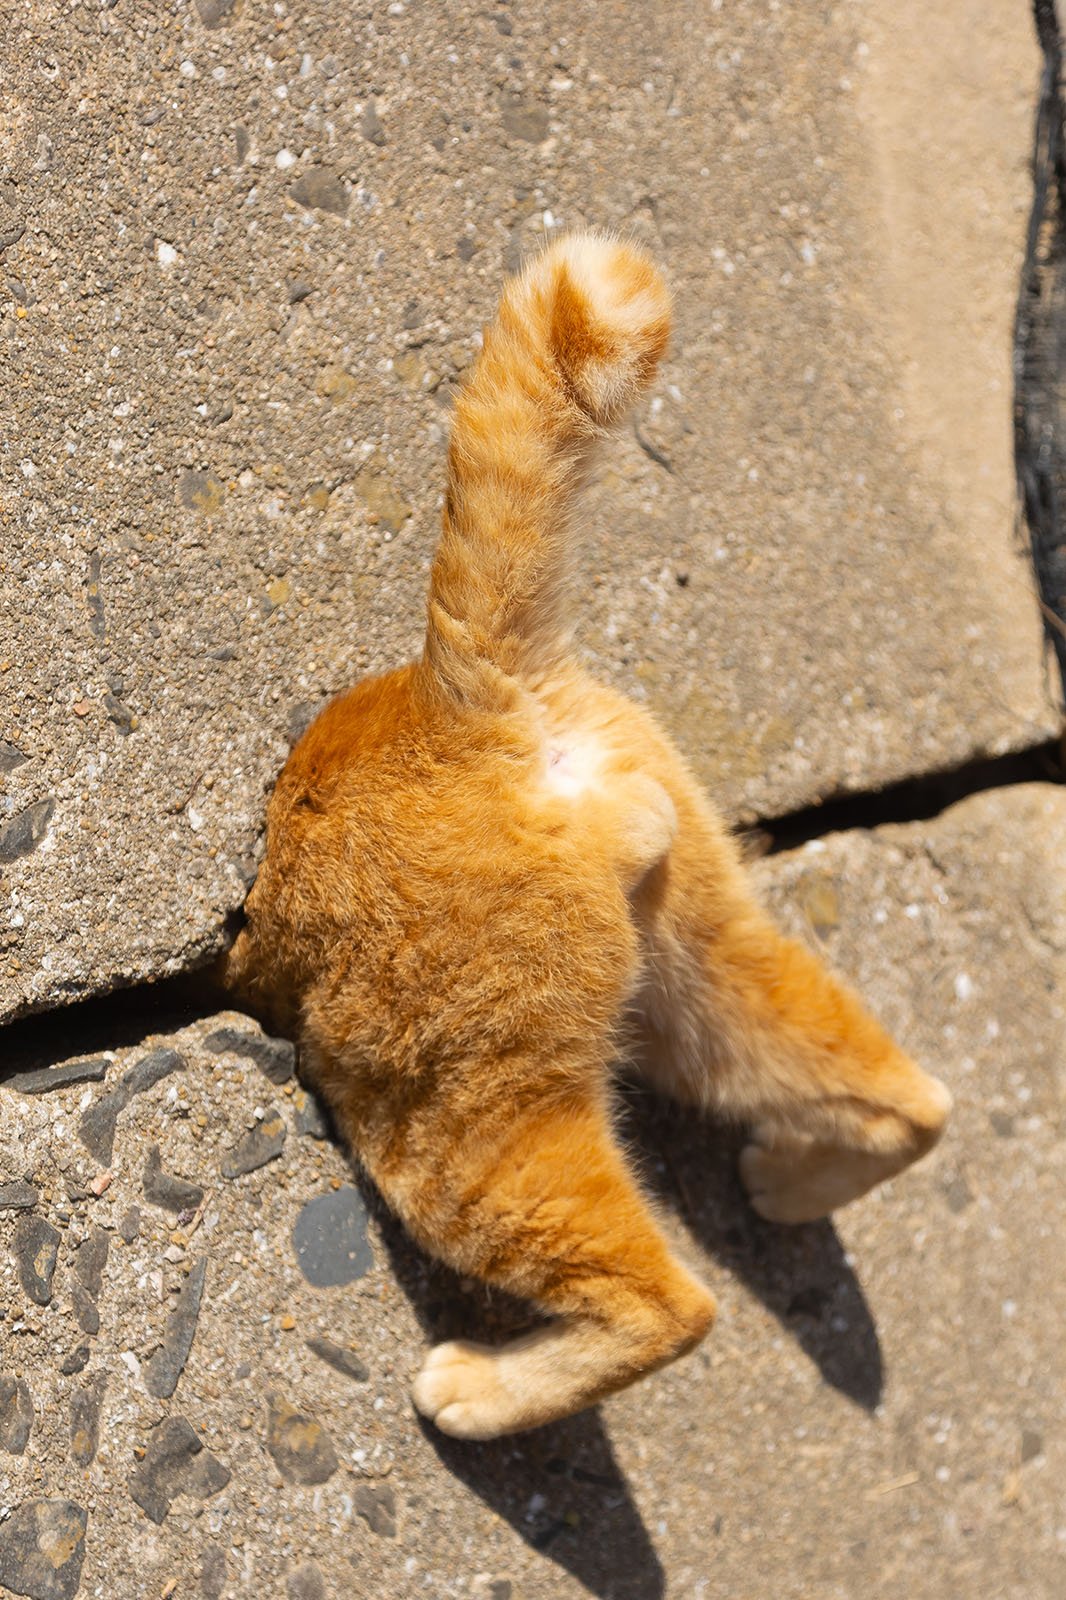 A ginger cat with its back to the camera is squeezing under a large rock, with only its hind legs and tail visible.